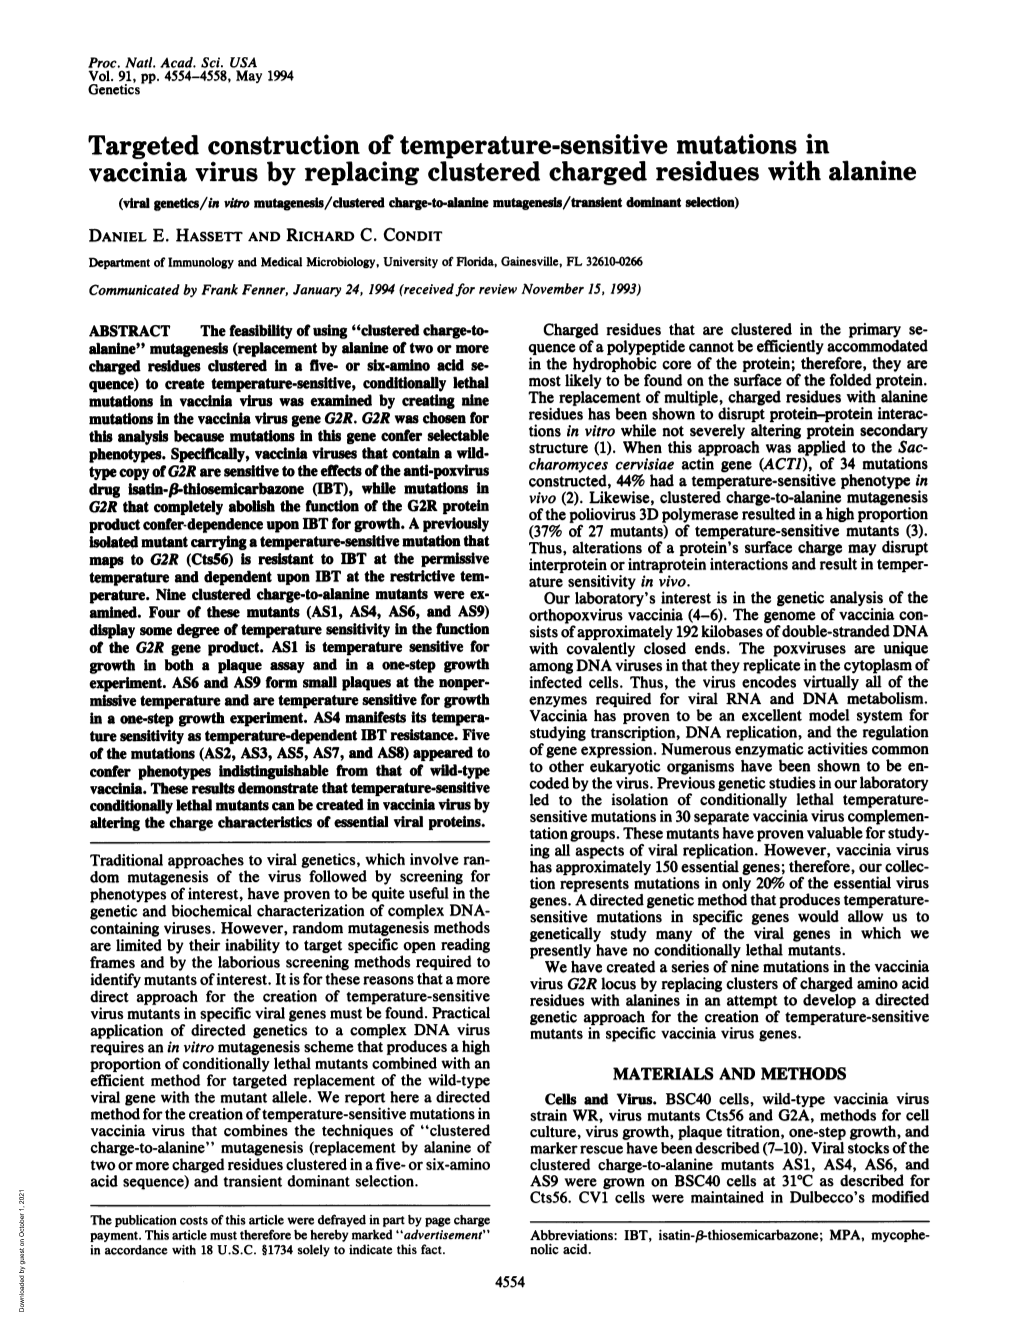 Vaccinia Virus by Replacing Clustered Charged Residues with Alanine